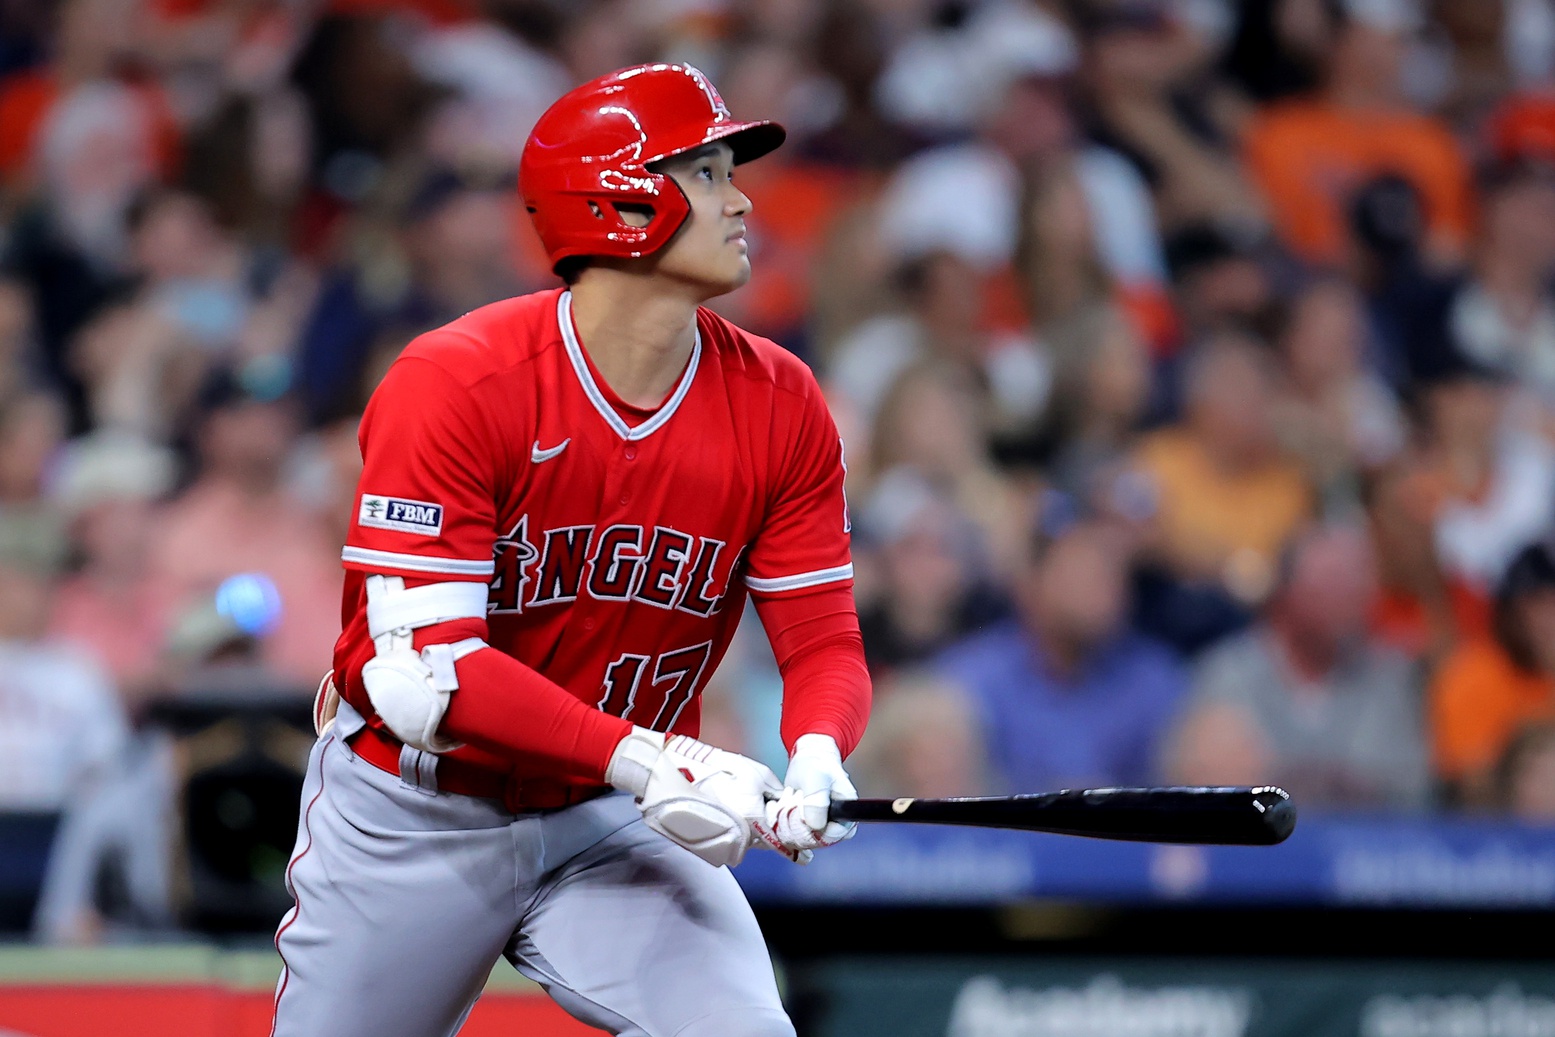 Shohei Ohtani out of lineup with right oblique injury